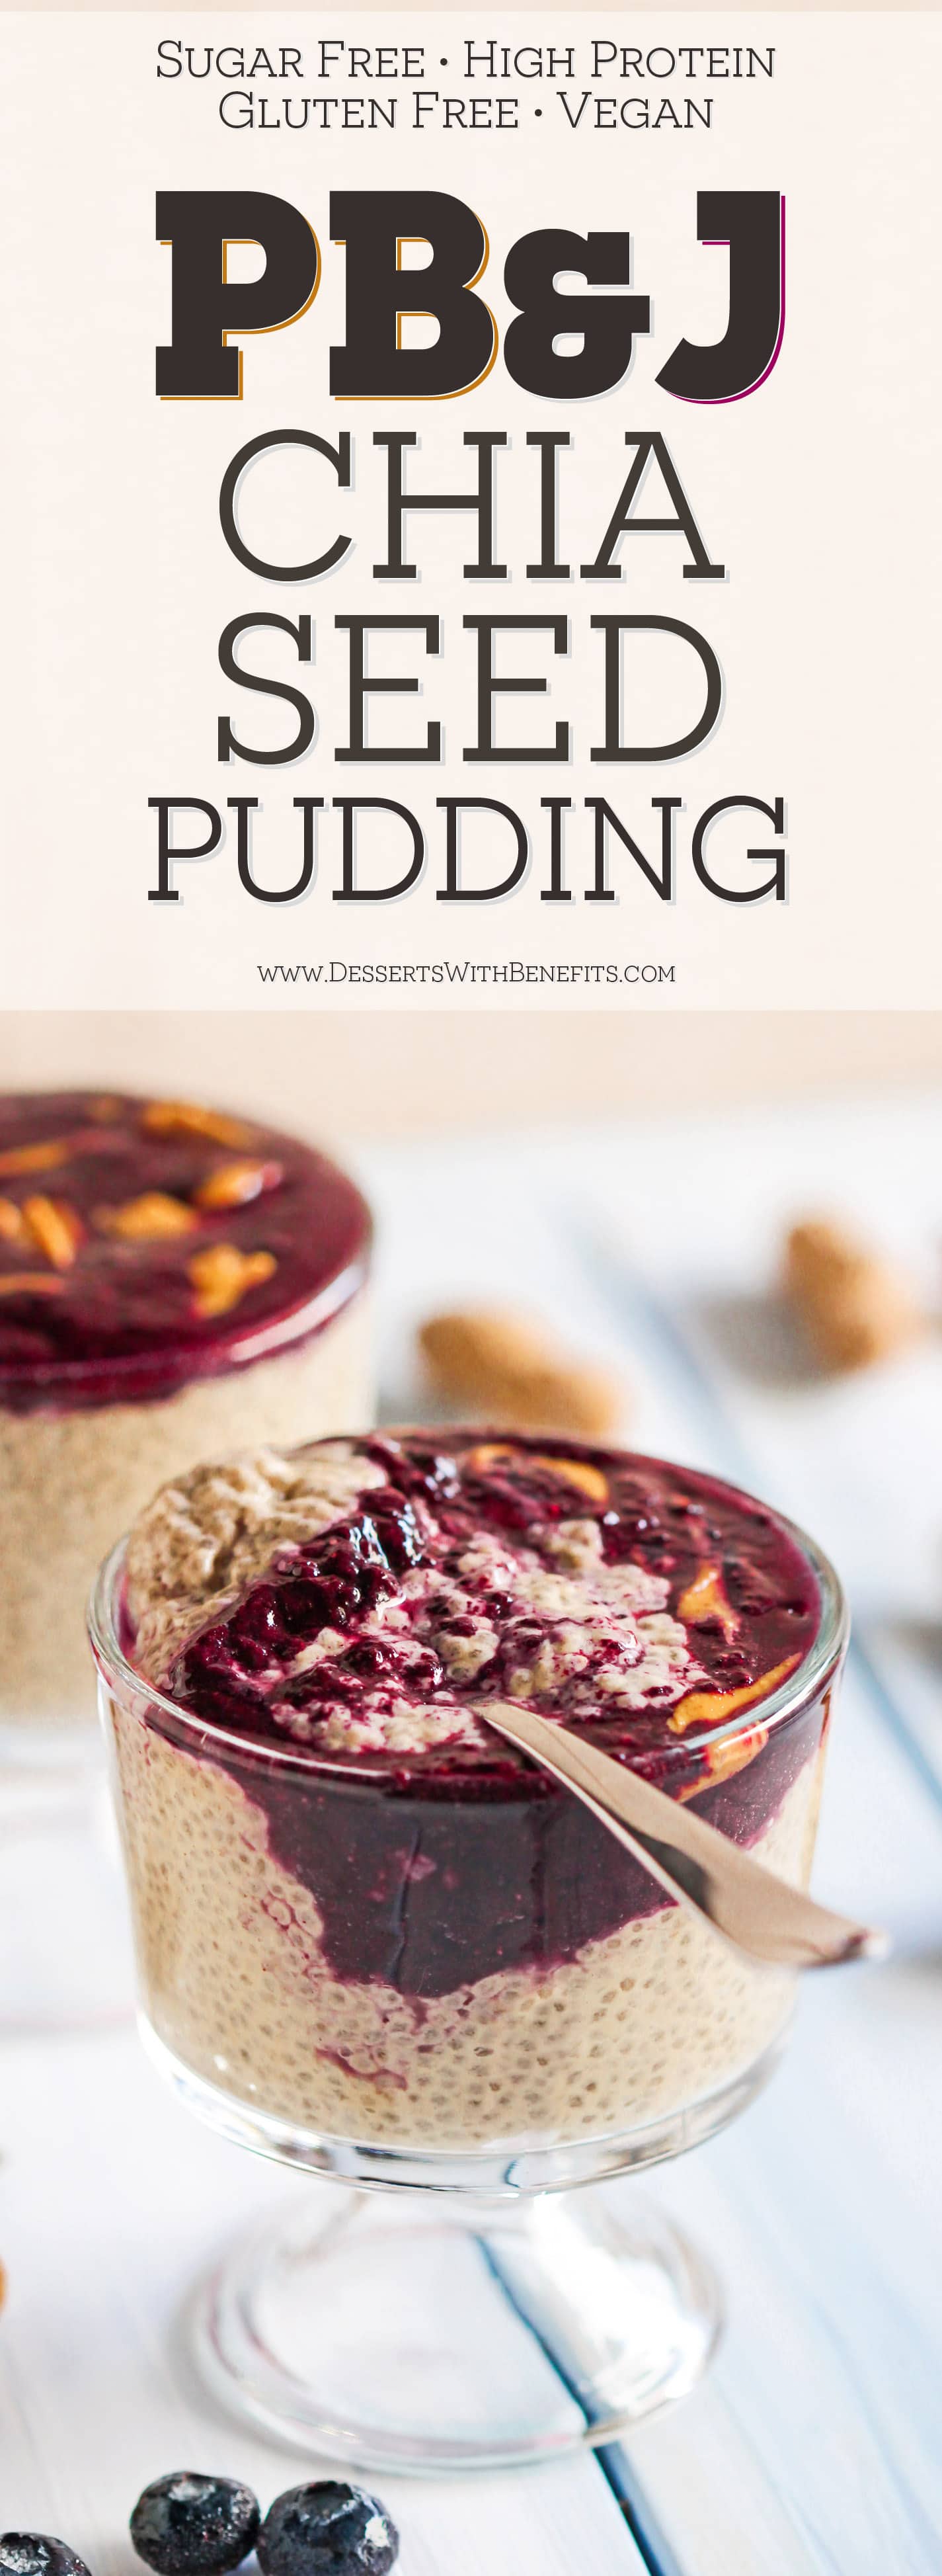 This 5-ingredient Healthy Peanut Butter and Jelly Chia Seed Pudding recipe has ALL the PB&J flavor your heart (and tastebuds) could ever desire, but in a healthier form! This is super easy to make and even easier to eat. You’d never know it’s sugar free, gluten free, high protein, and vegan too! Healthy Dessert Recipes at the Desserts With Benefits Blog (www.DessertsWithBenefits.com)